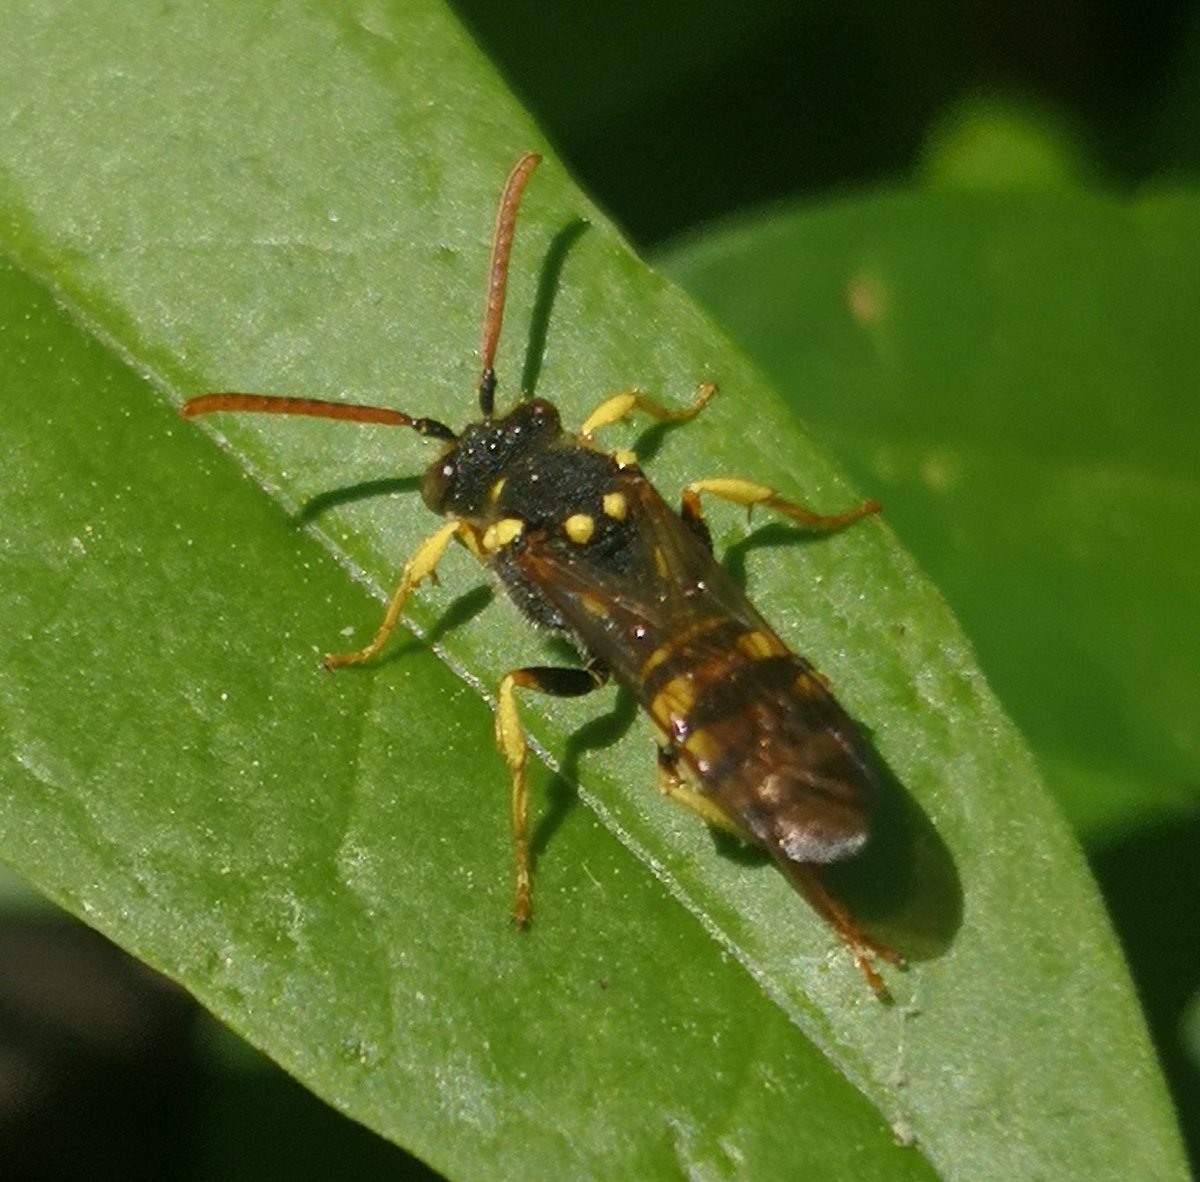 Nomad bees are already busy in Goettingen, looking for nests od their hosts to lay eggs, such as this Nomada succincta (best guess ID)